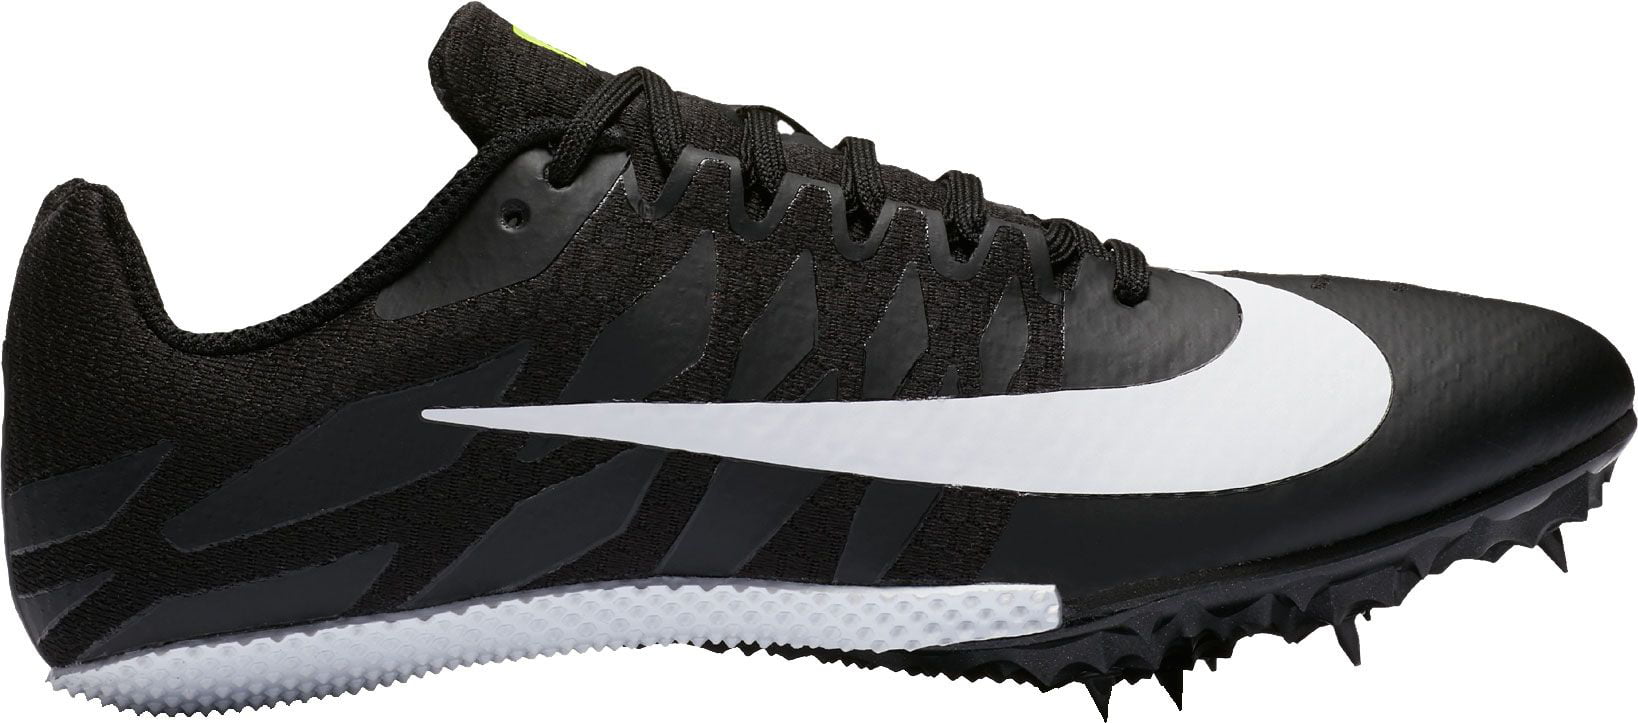 Zoom Rival S 9 Track and Field Shoes 